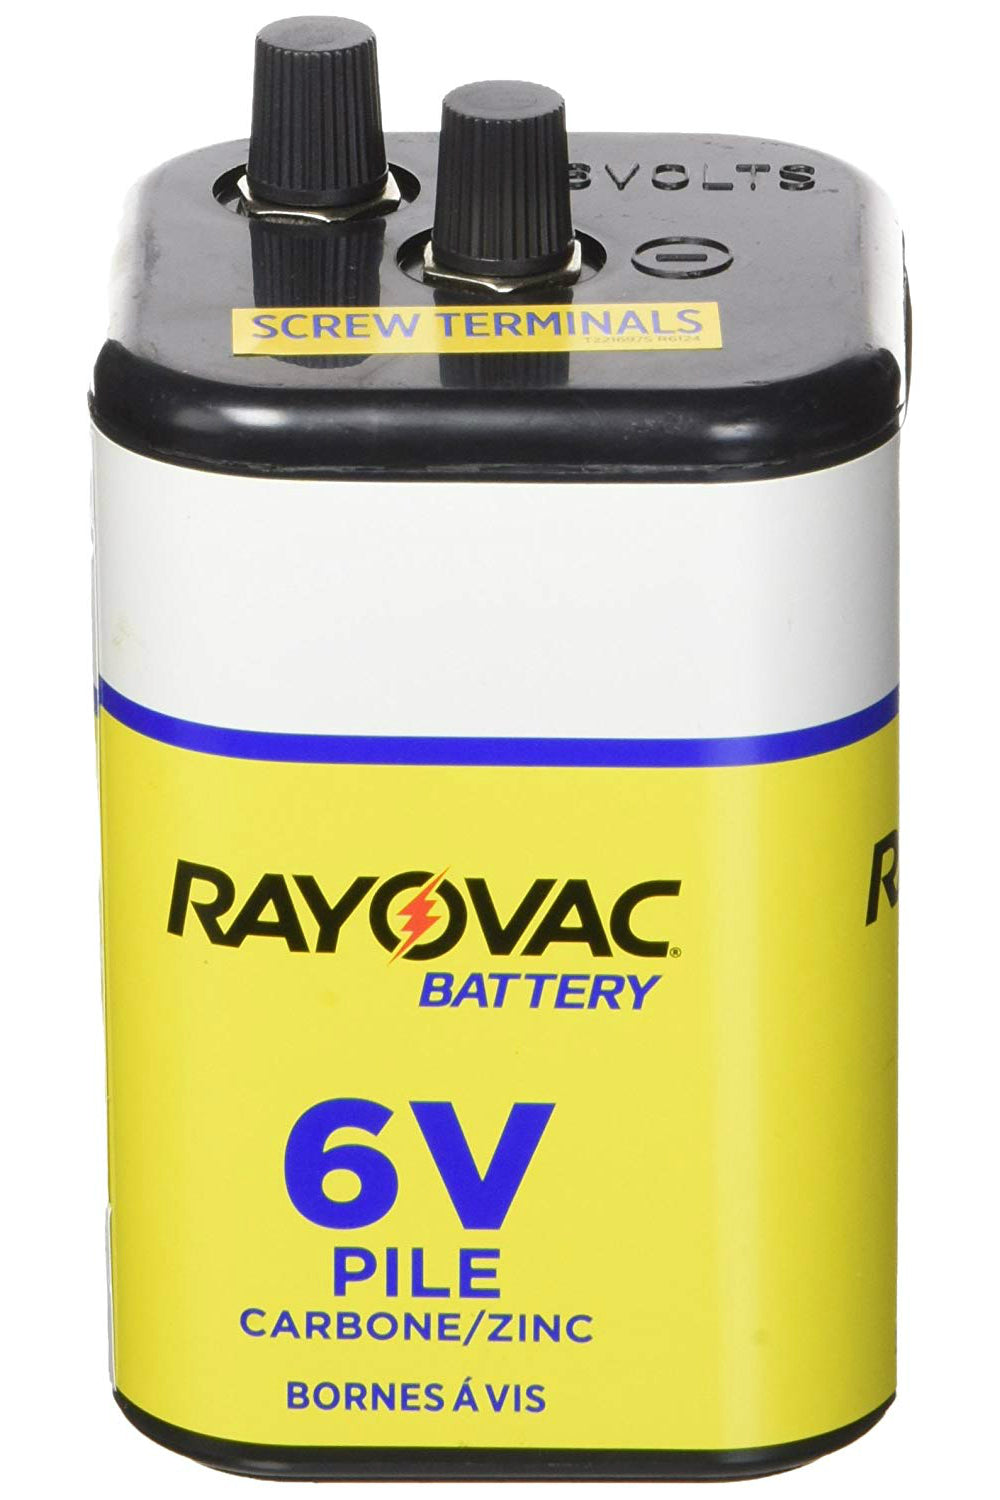 Buy rayovac 945r4 - Online store for electrical supplies, lantern in USA, on sale, low price, discount deals, coupon code